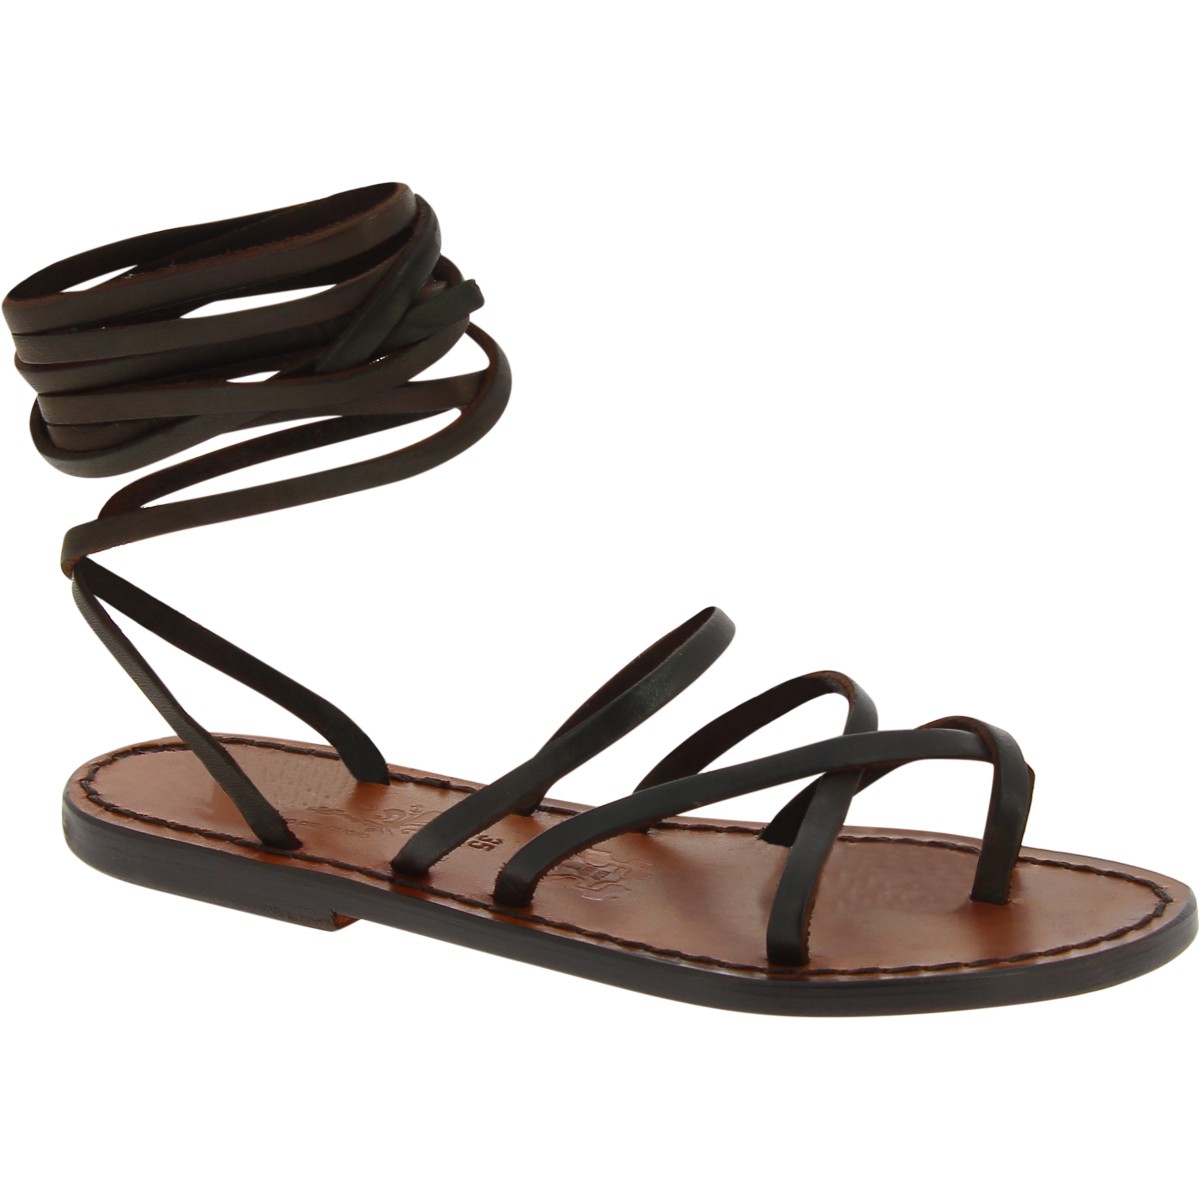 Women's dark brown strappy leather sandals handmade in Italy | The ...